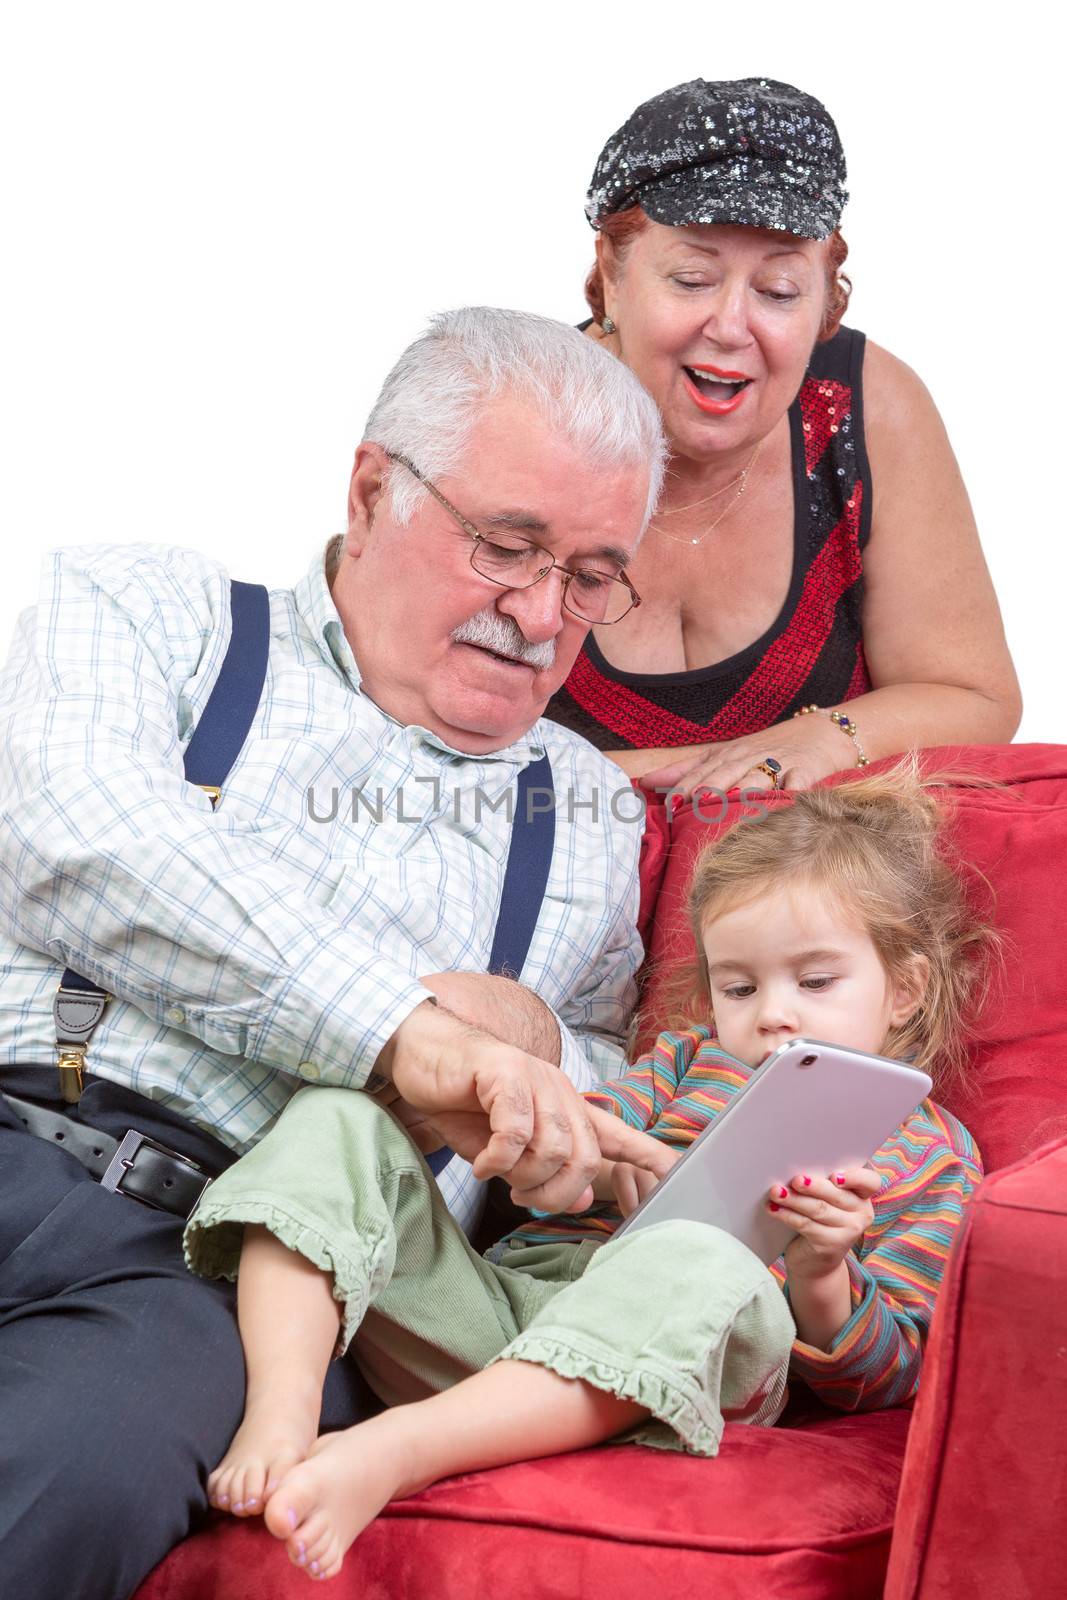 Grandparents babysitting their granddaughter sitting together ion a couch pointing out information on the tablet computer to her as they enjoy an e-book together